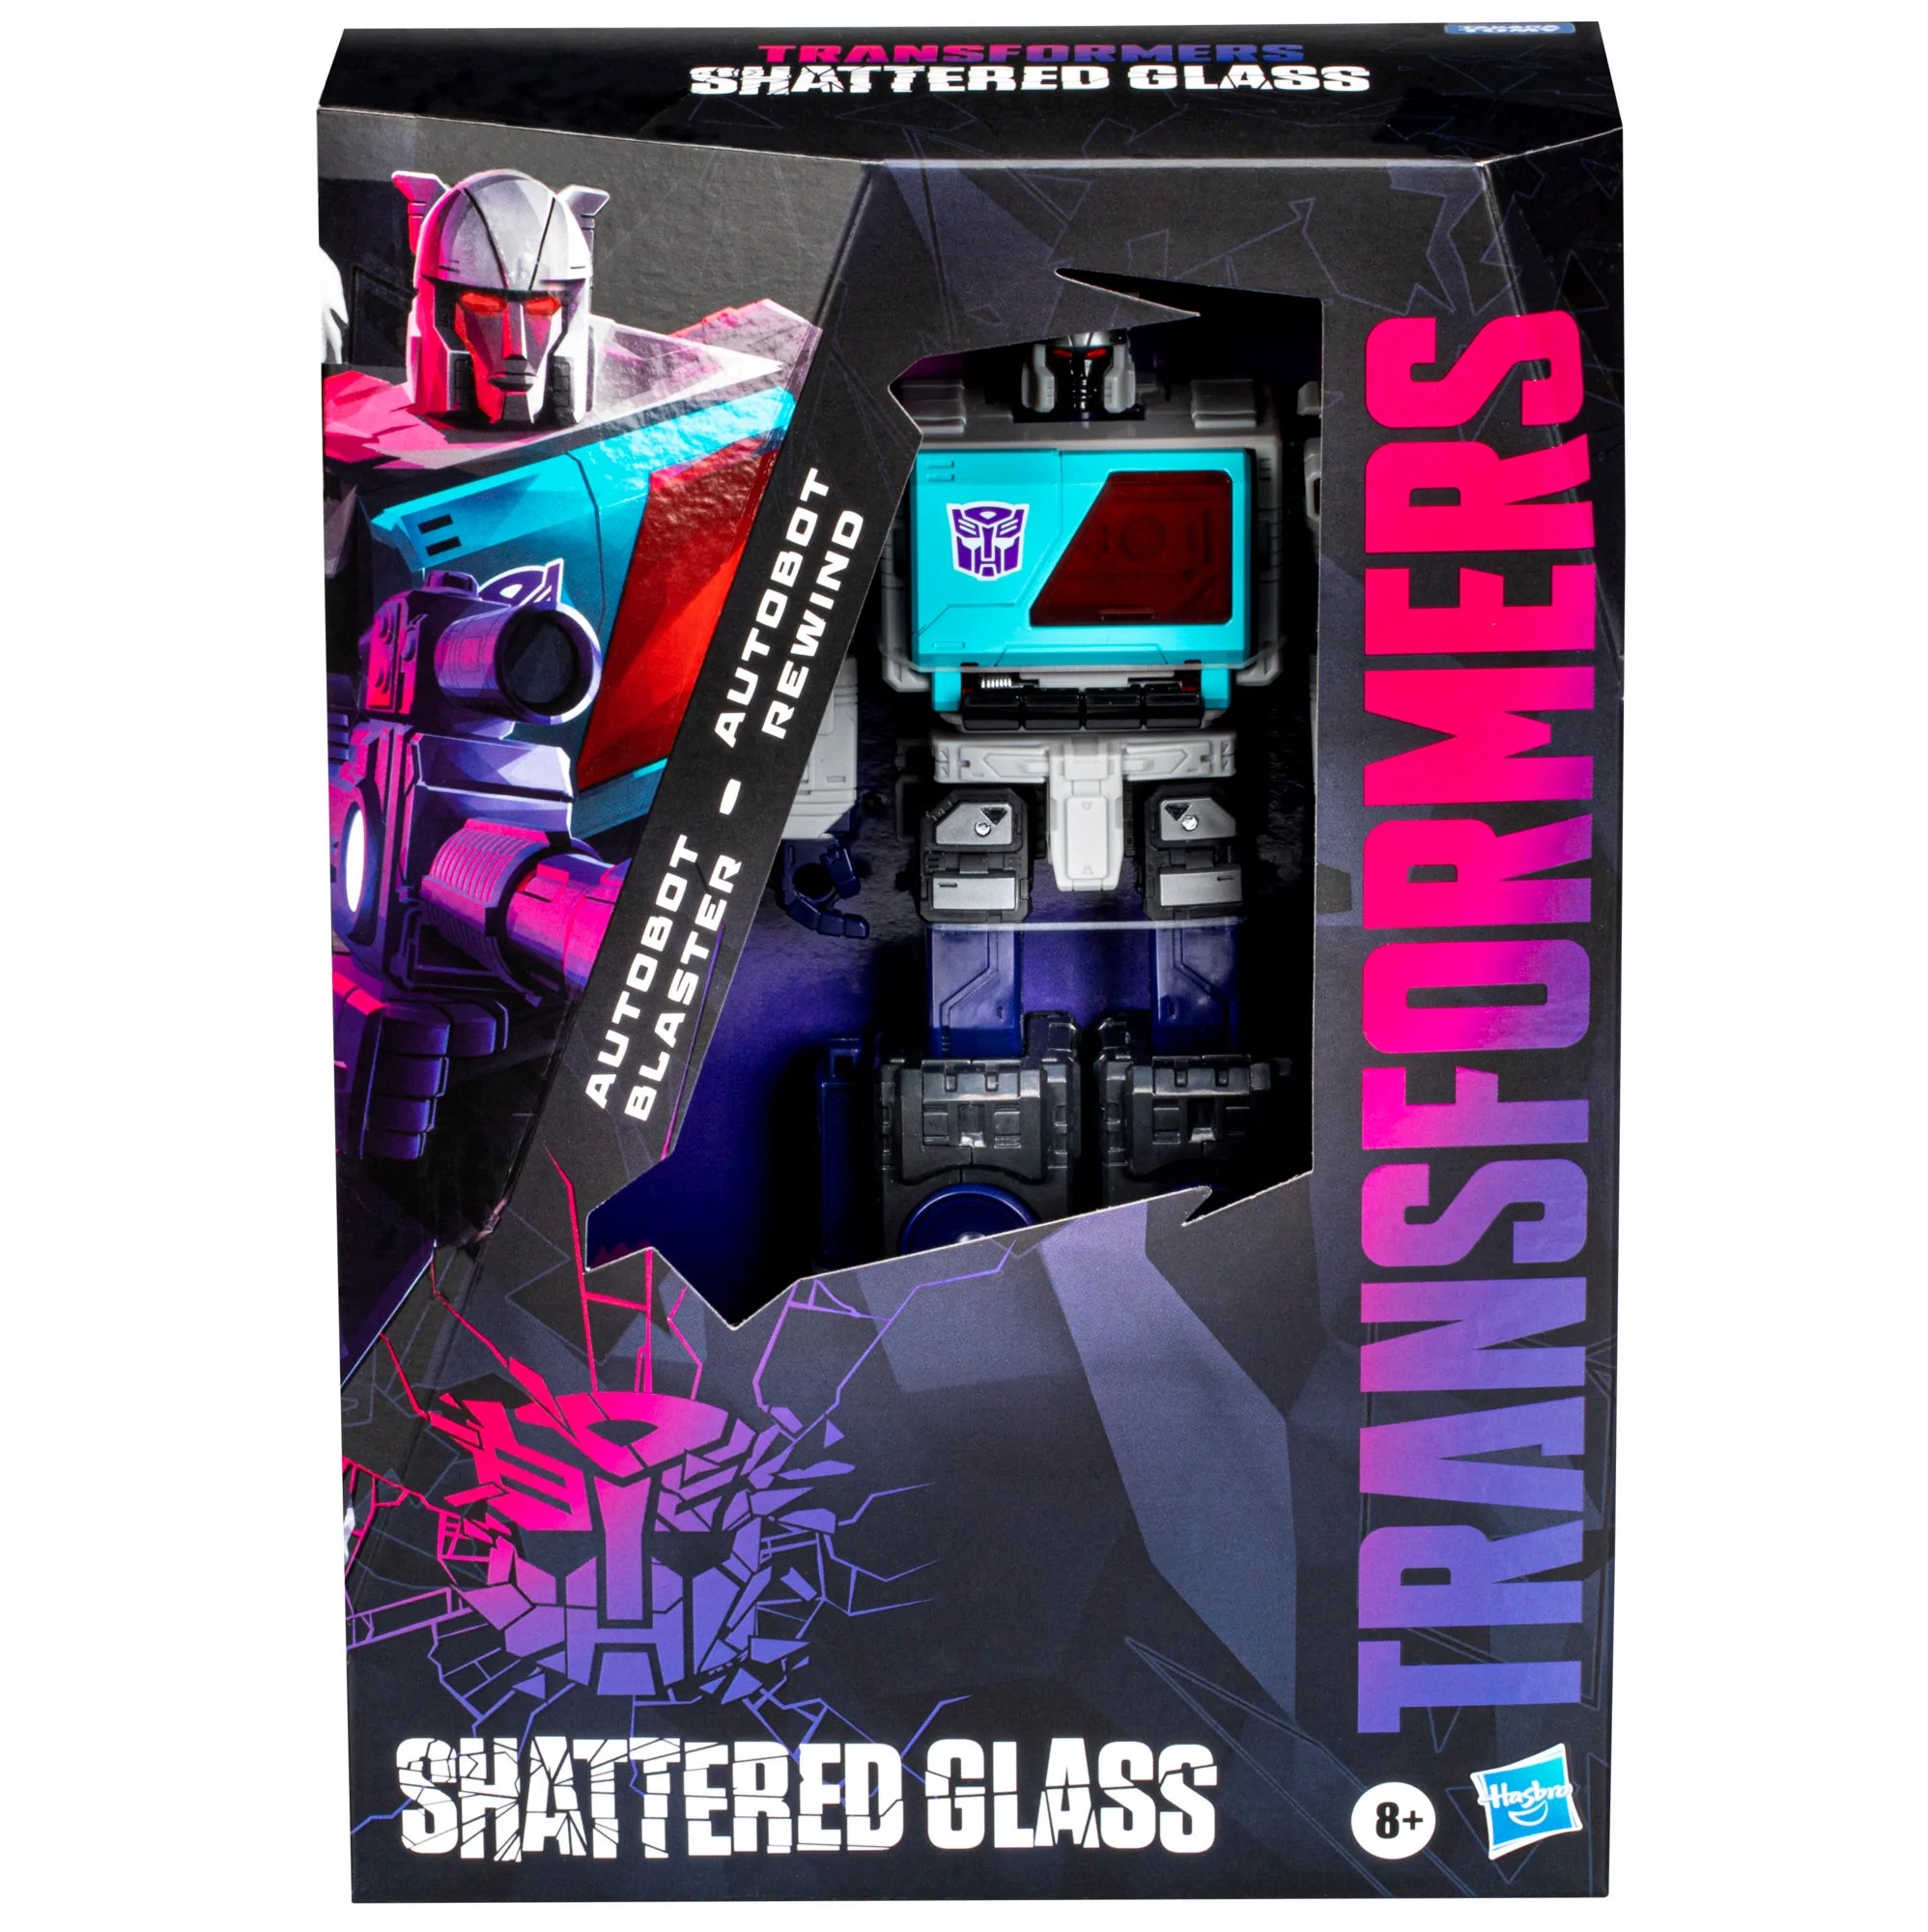 Transformers Generations Shattered Glass Voyager Autobot Blaster & Rewind Exclusive Action Figure